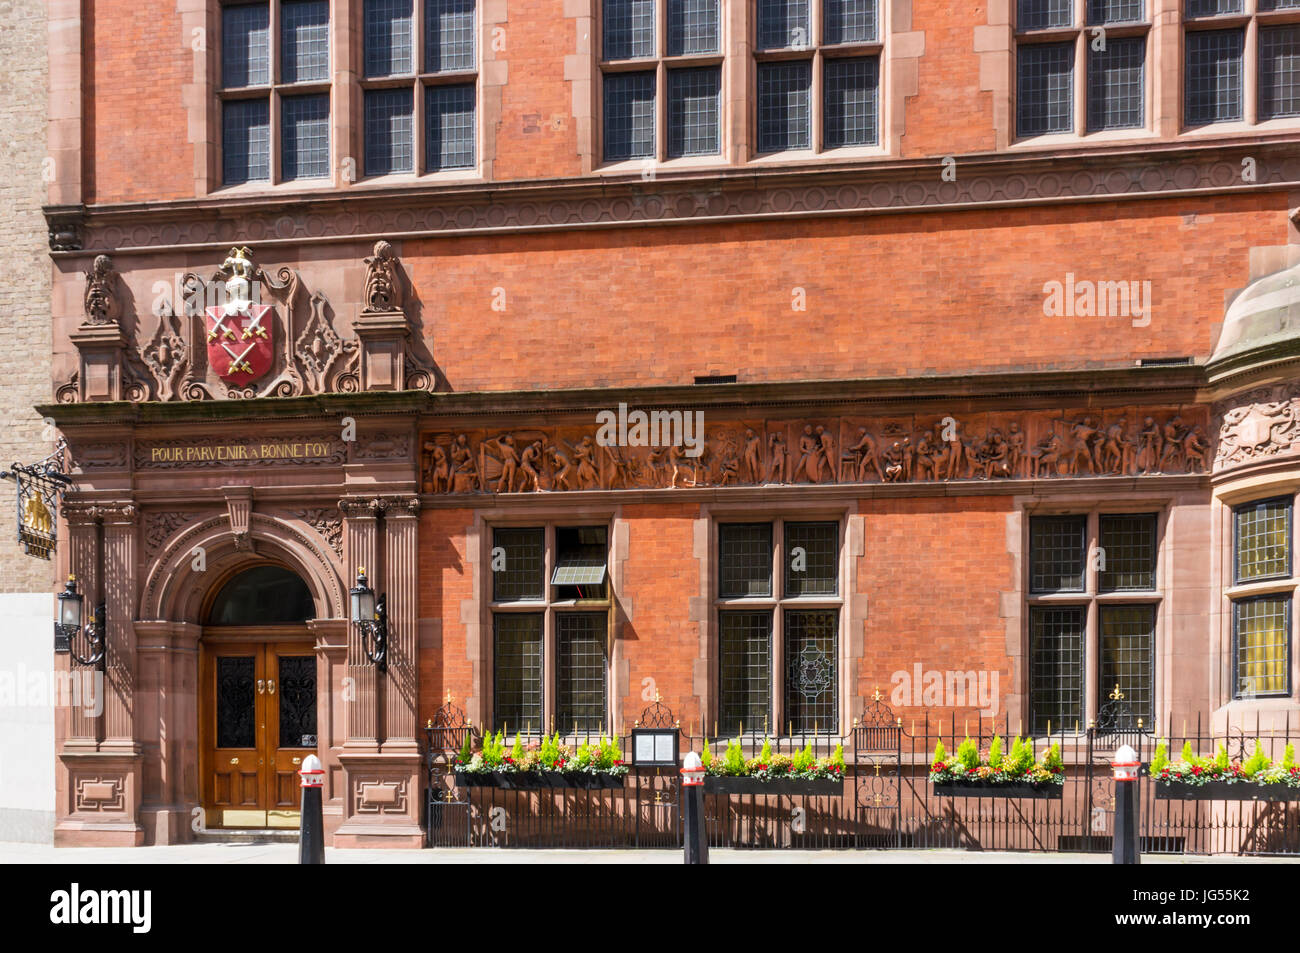 Cutler's Hall is the home of the Worshipful Company of Cutlers, one of the Livery Companies of the City of London. Located in Warwick Lane. Stock Photo